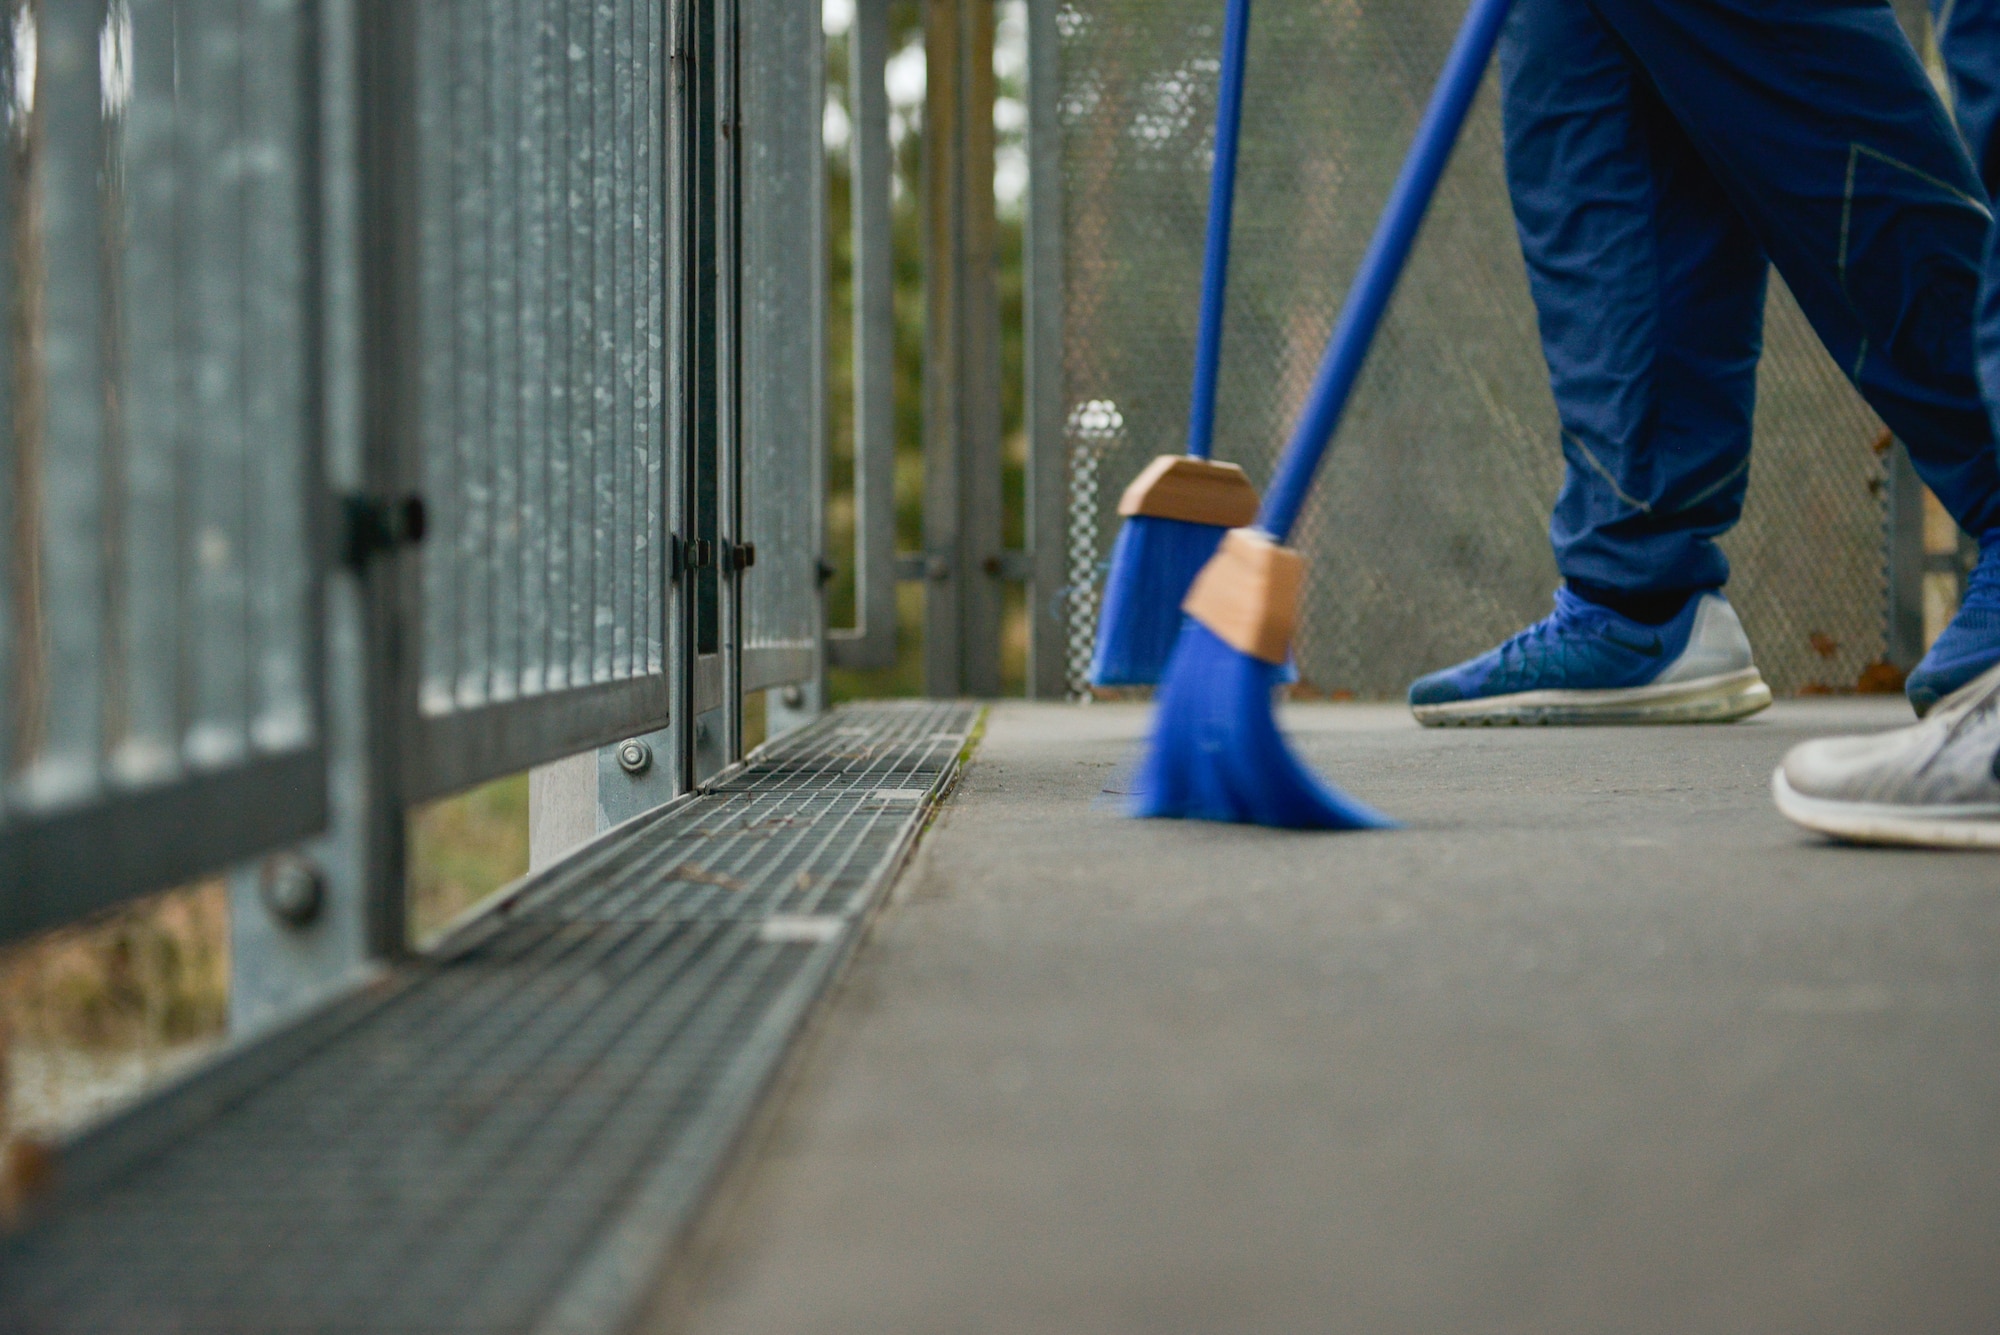 Airmen sweep walkways during a dorm clean-up Jan. 30, 2016, at Ramstein Air Base, Germany. The event allowed the base’s Dorm Reception Center to kick-off the renovated bay-orderly program, which now has Airmen cleaning around their assigned dorms instead of around the base. (U.S. Air Force photo/Airman 1st Class Lane T. Plummer)